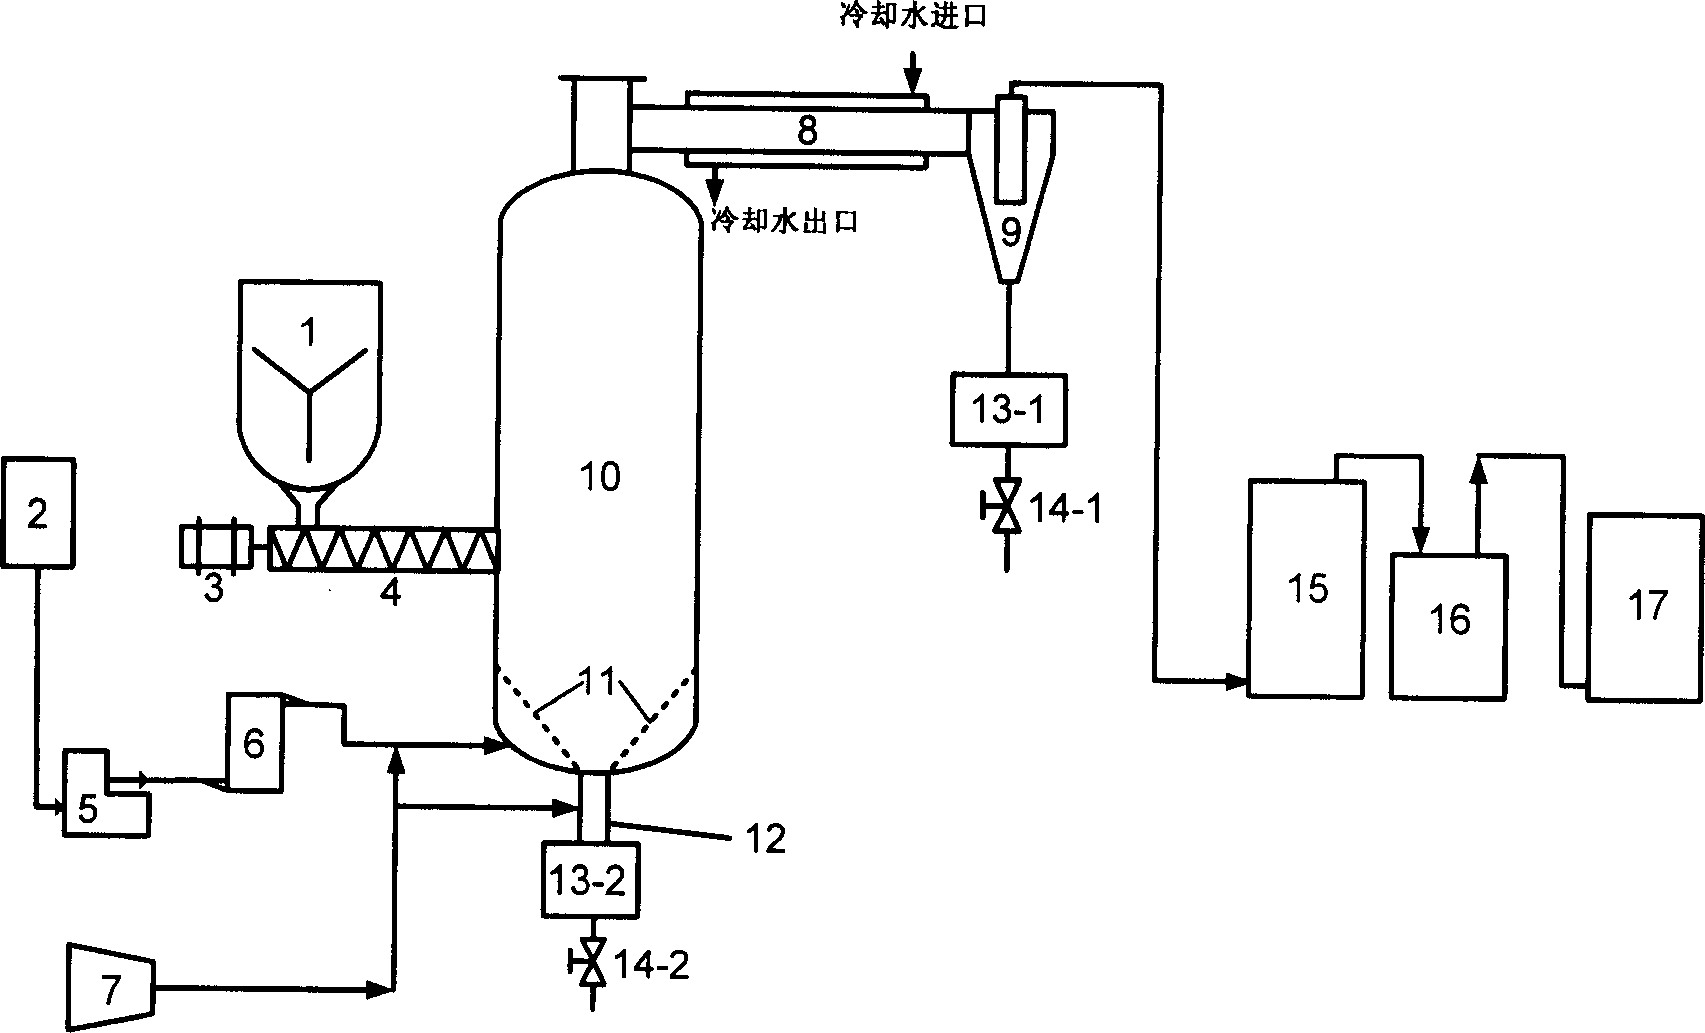 Method for preparing fuel gas by fluidized bed co-gasification of biomass and coal